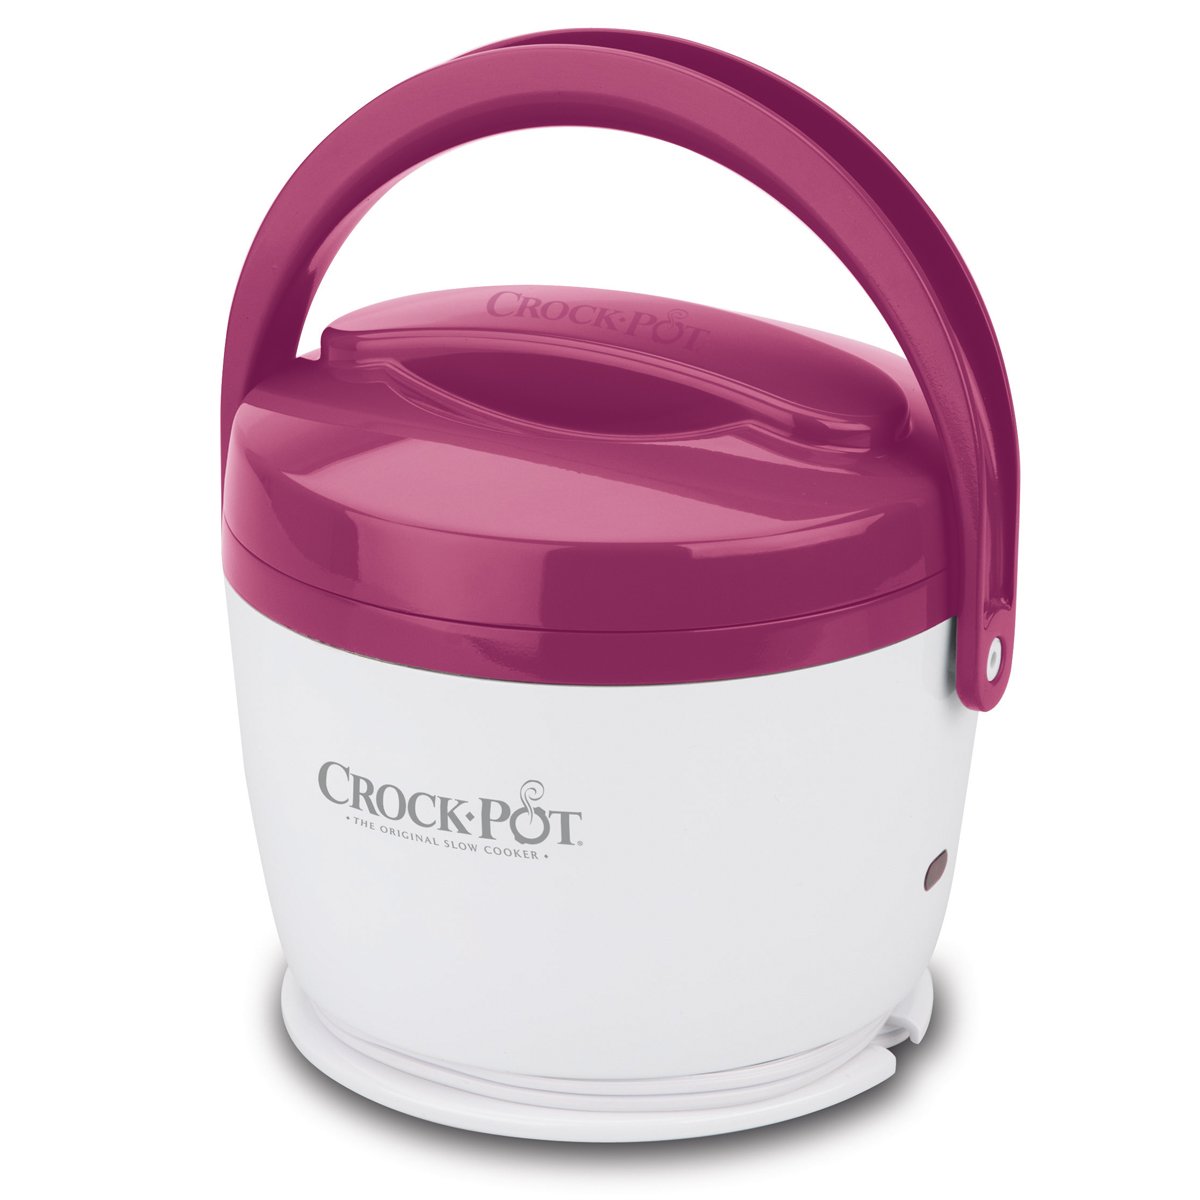 More than 12,000  shoppers swear by Crockpot's lunch box for